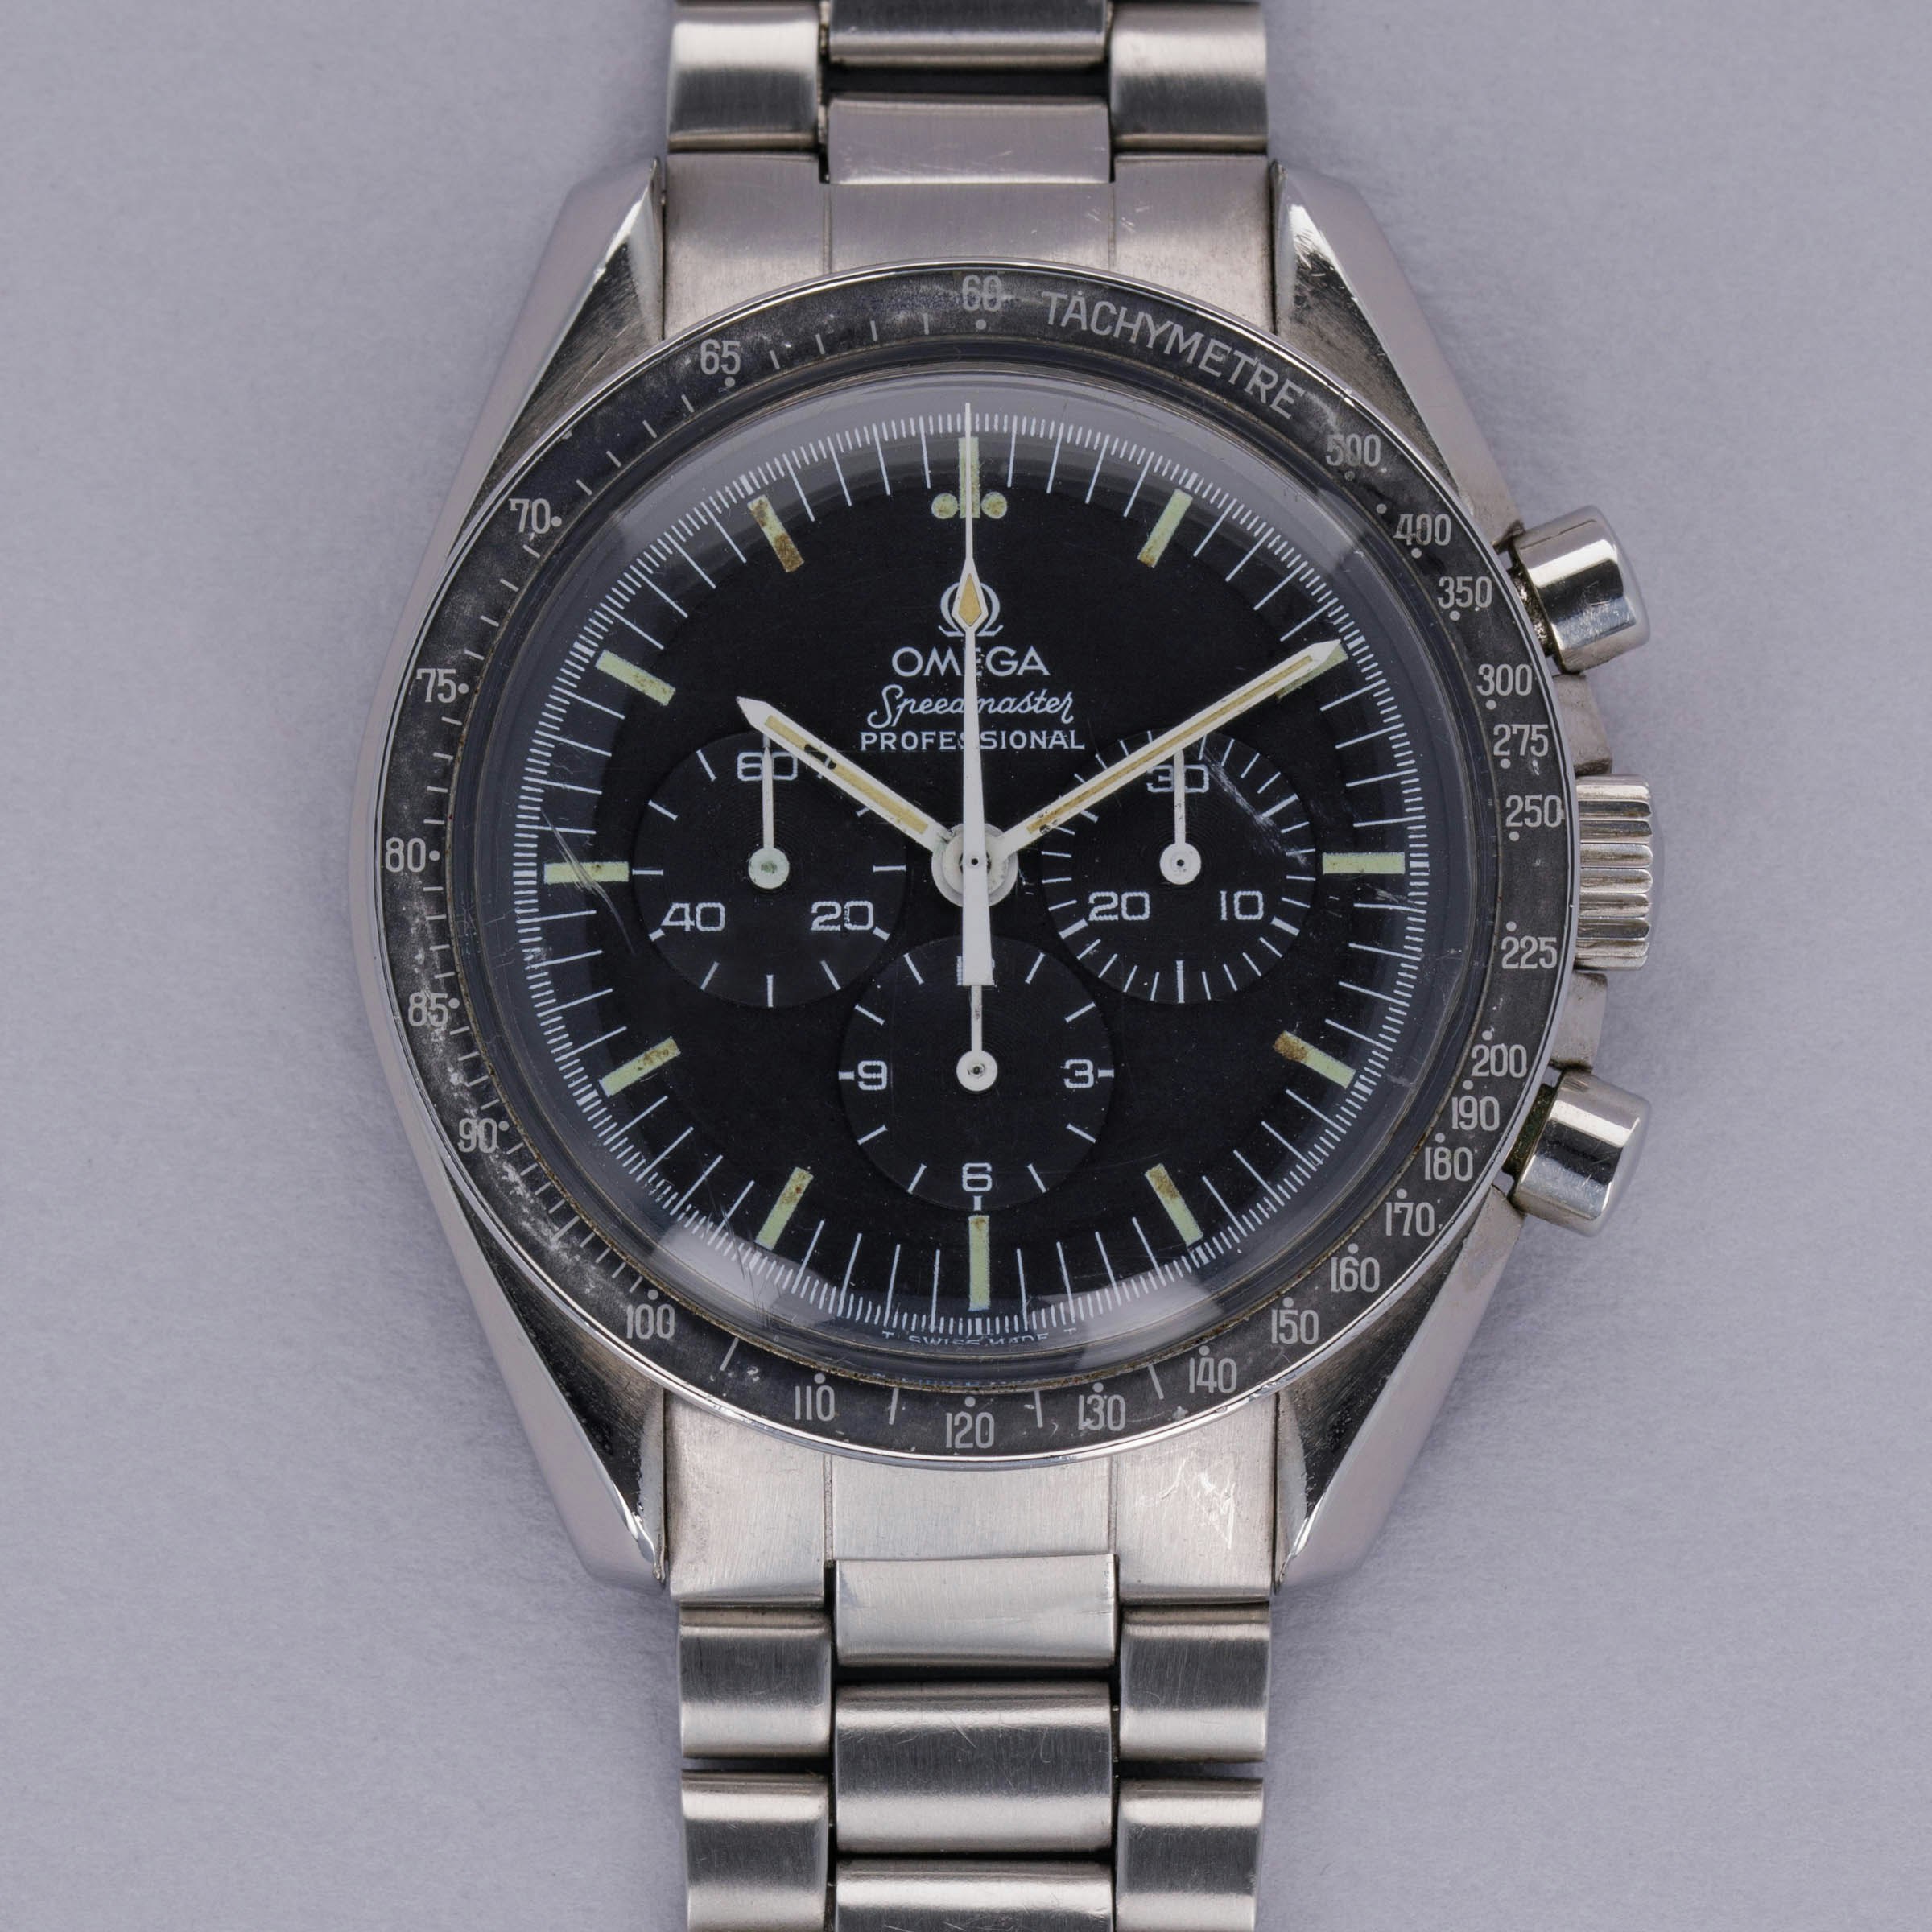 Thumbnail for Omega Speedmaster Professional ST 145.022 Original Box and Extract of the Archives